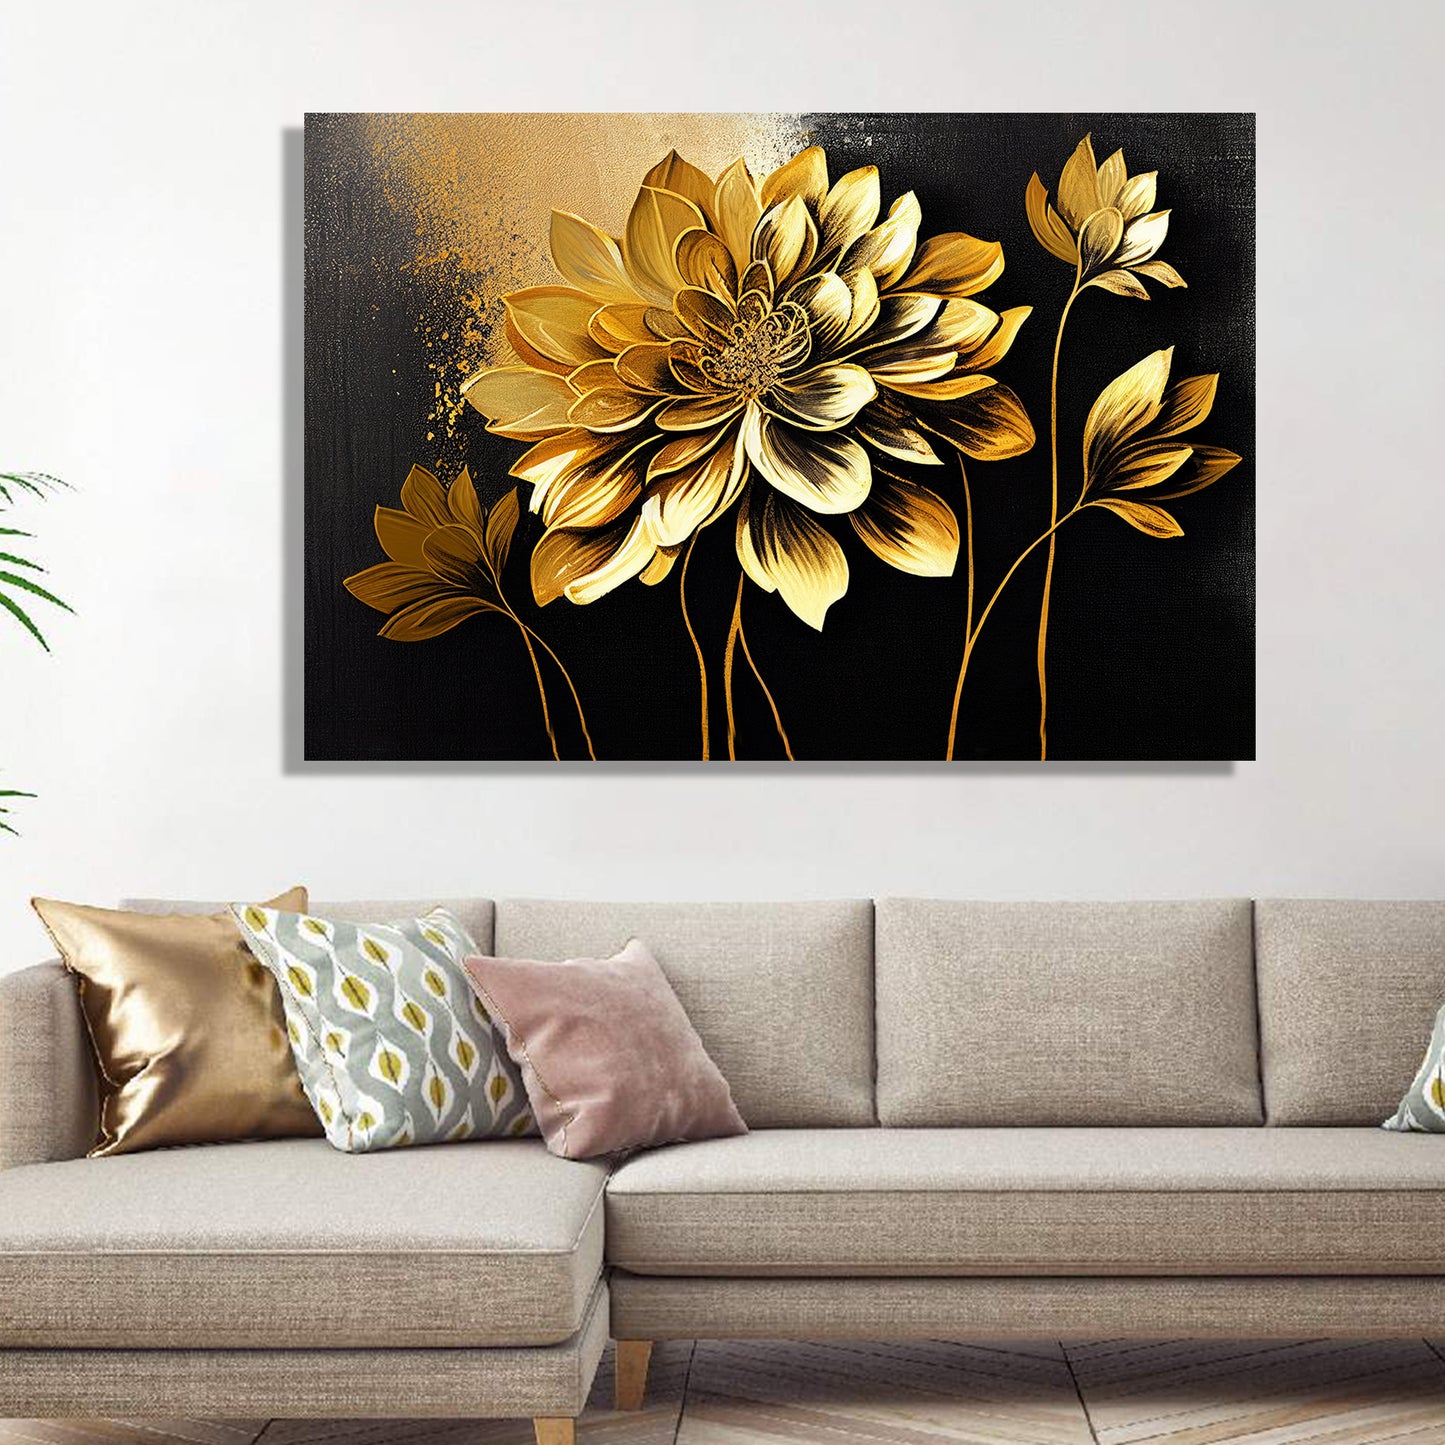 Golden Floral Art Painting for Wall Decor - Canvas Art for Living Room Bedroom Wall Decoration